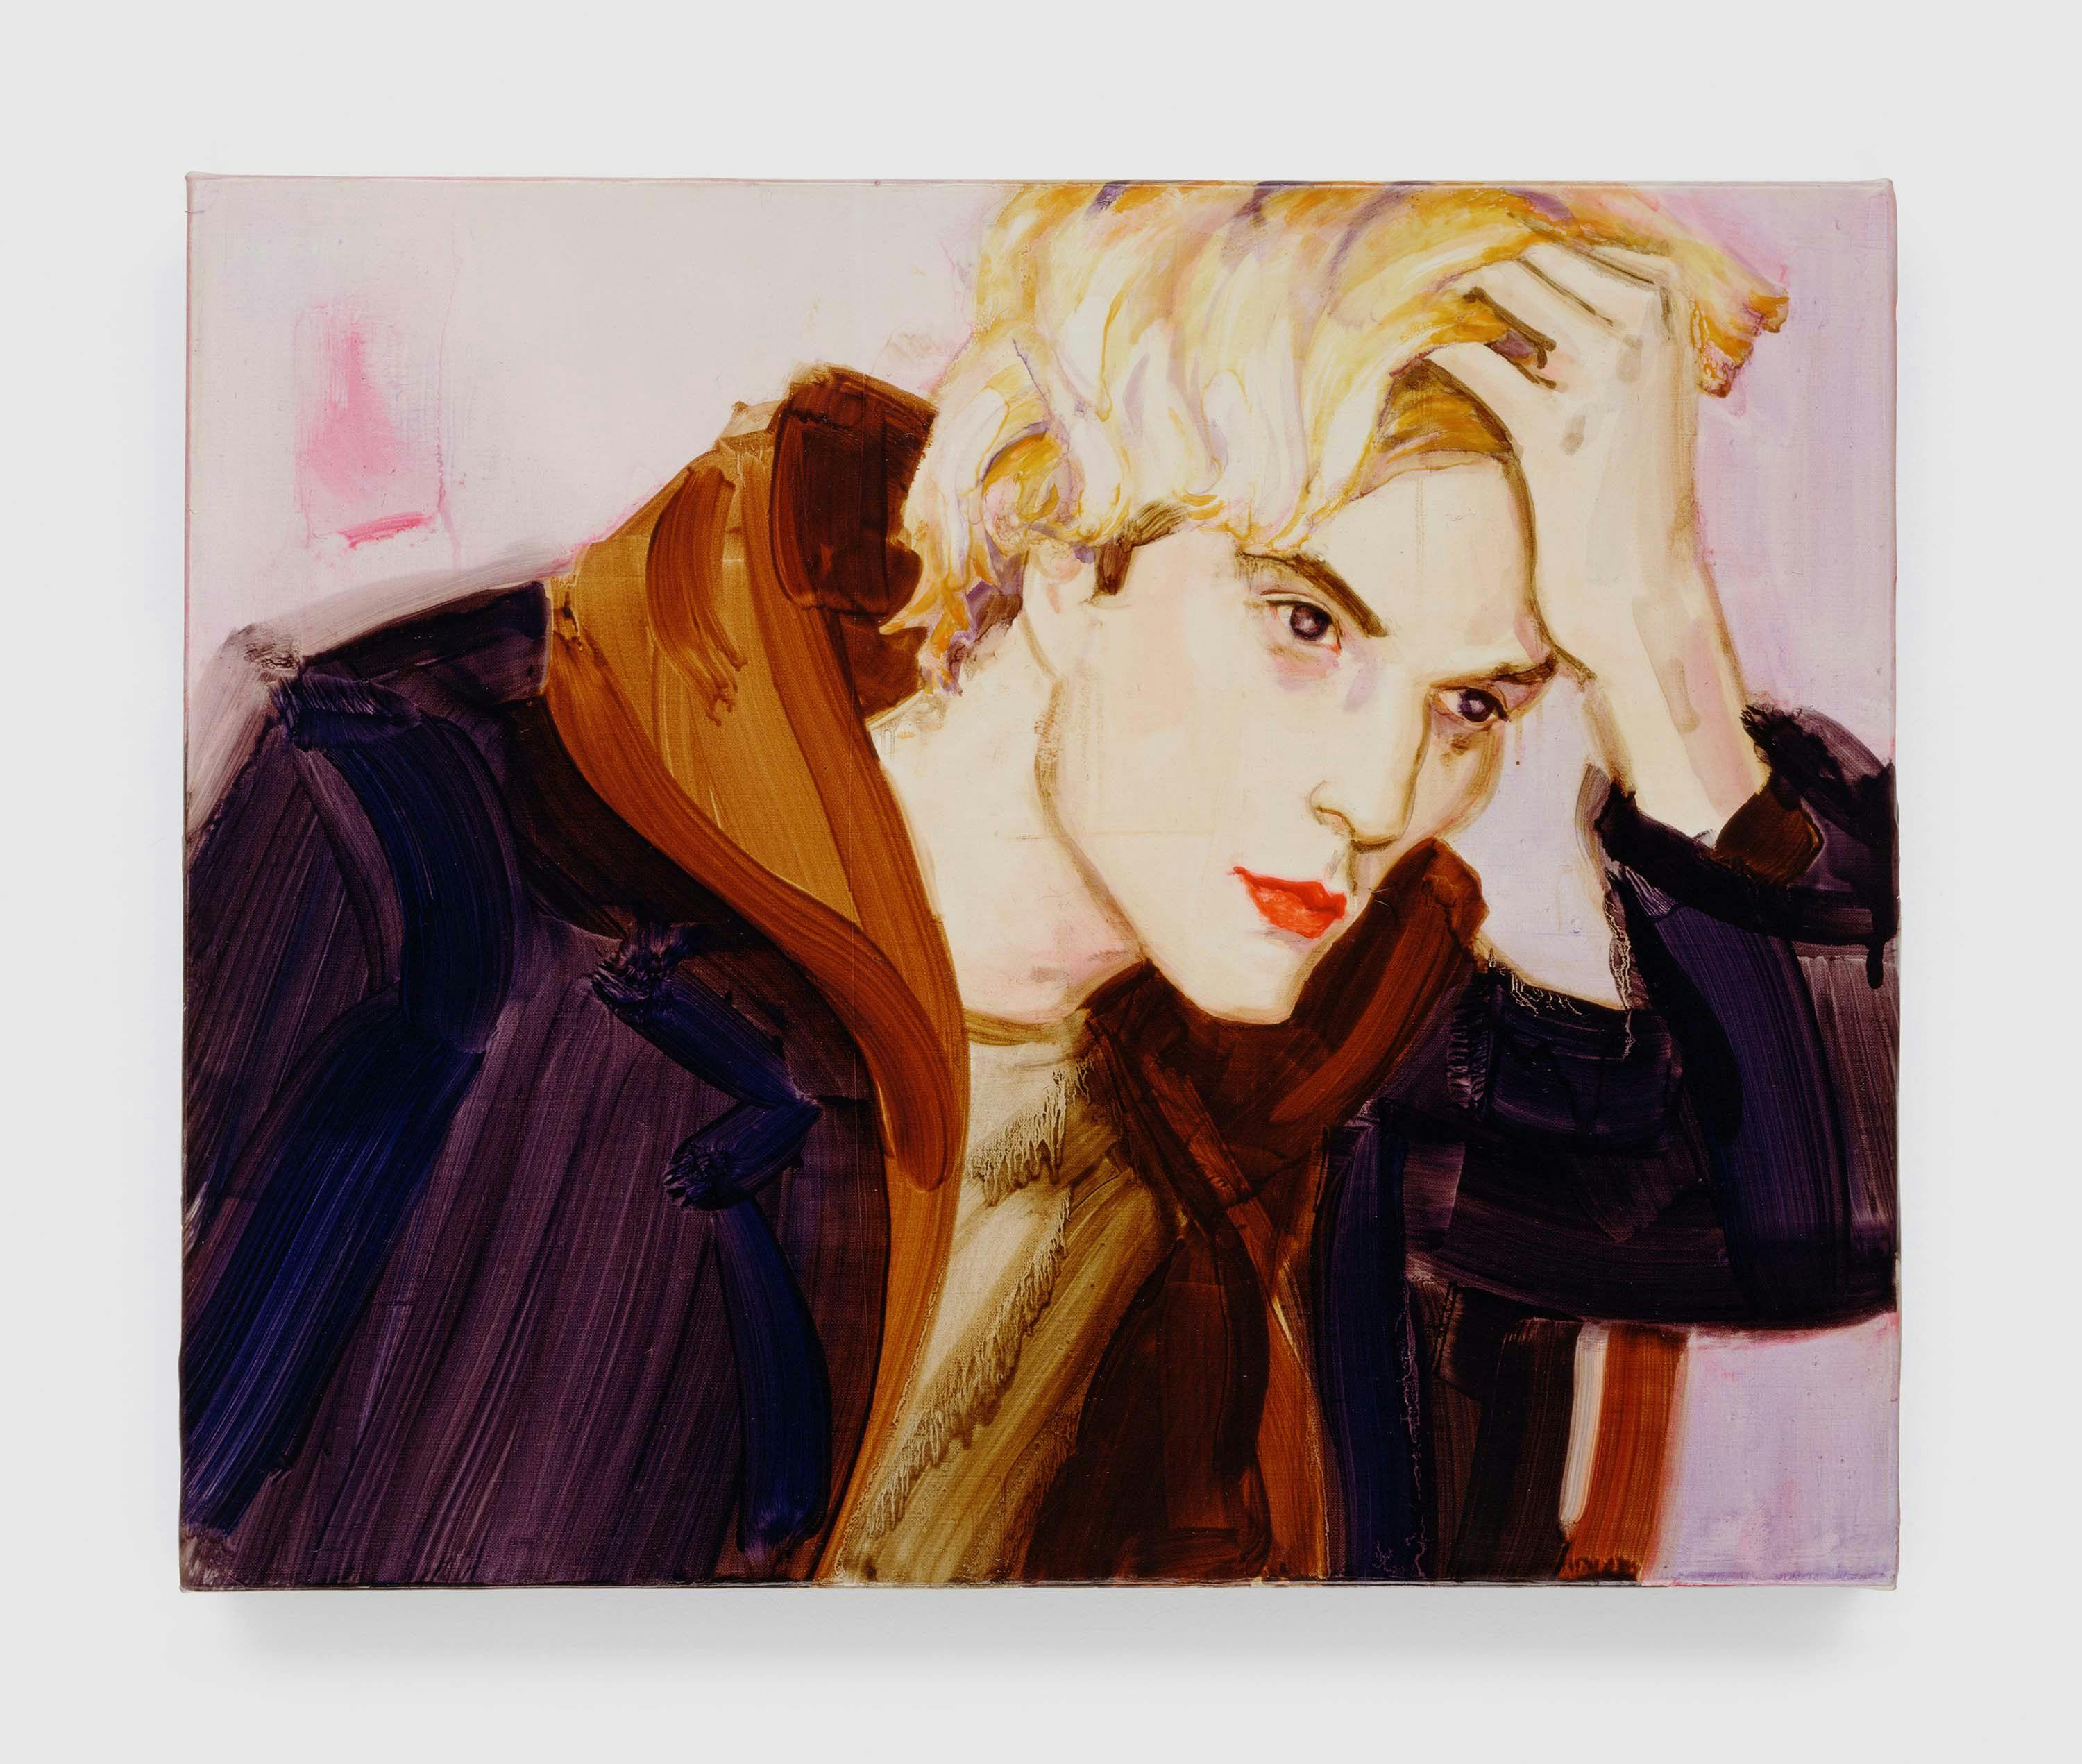 A painting by Elizabeth Peyton, titled Craig, dated 1997.